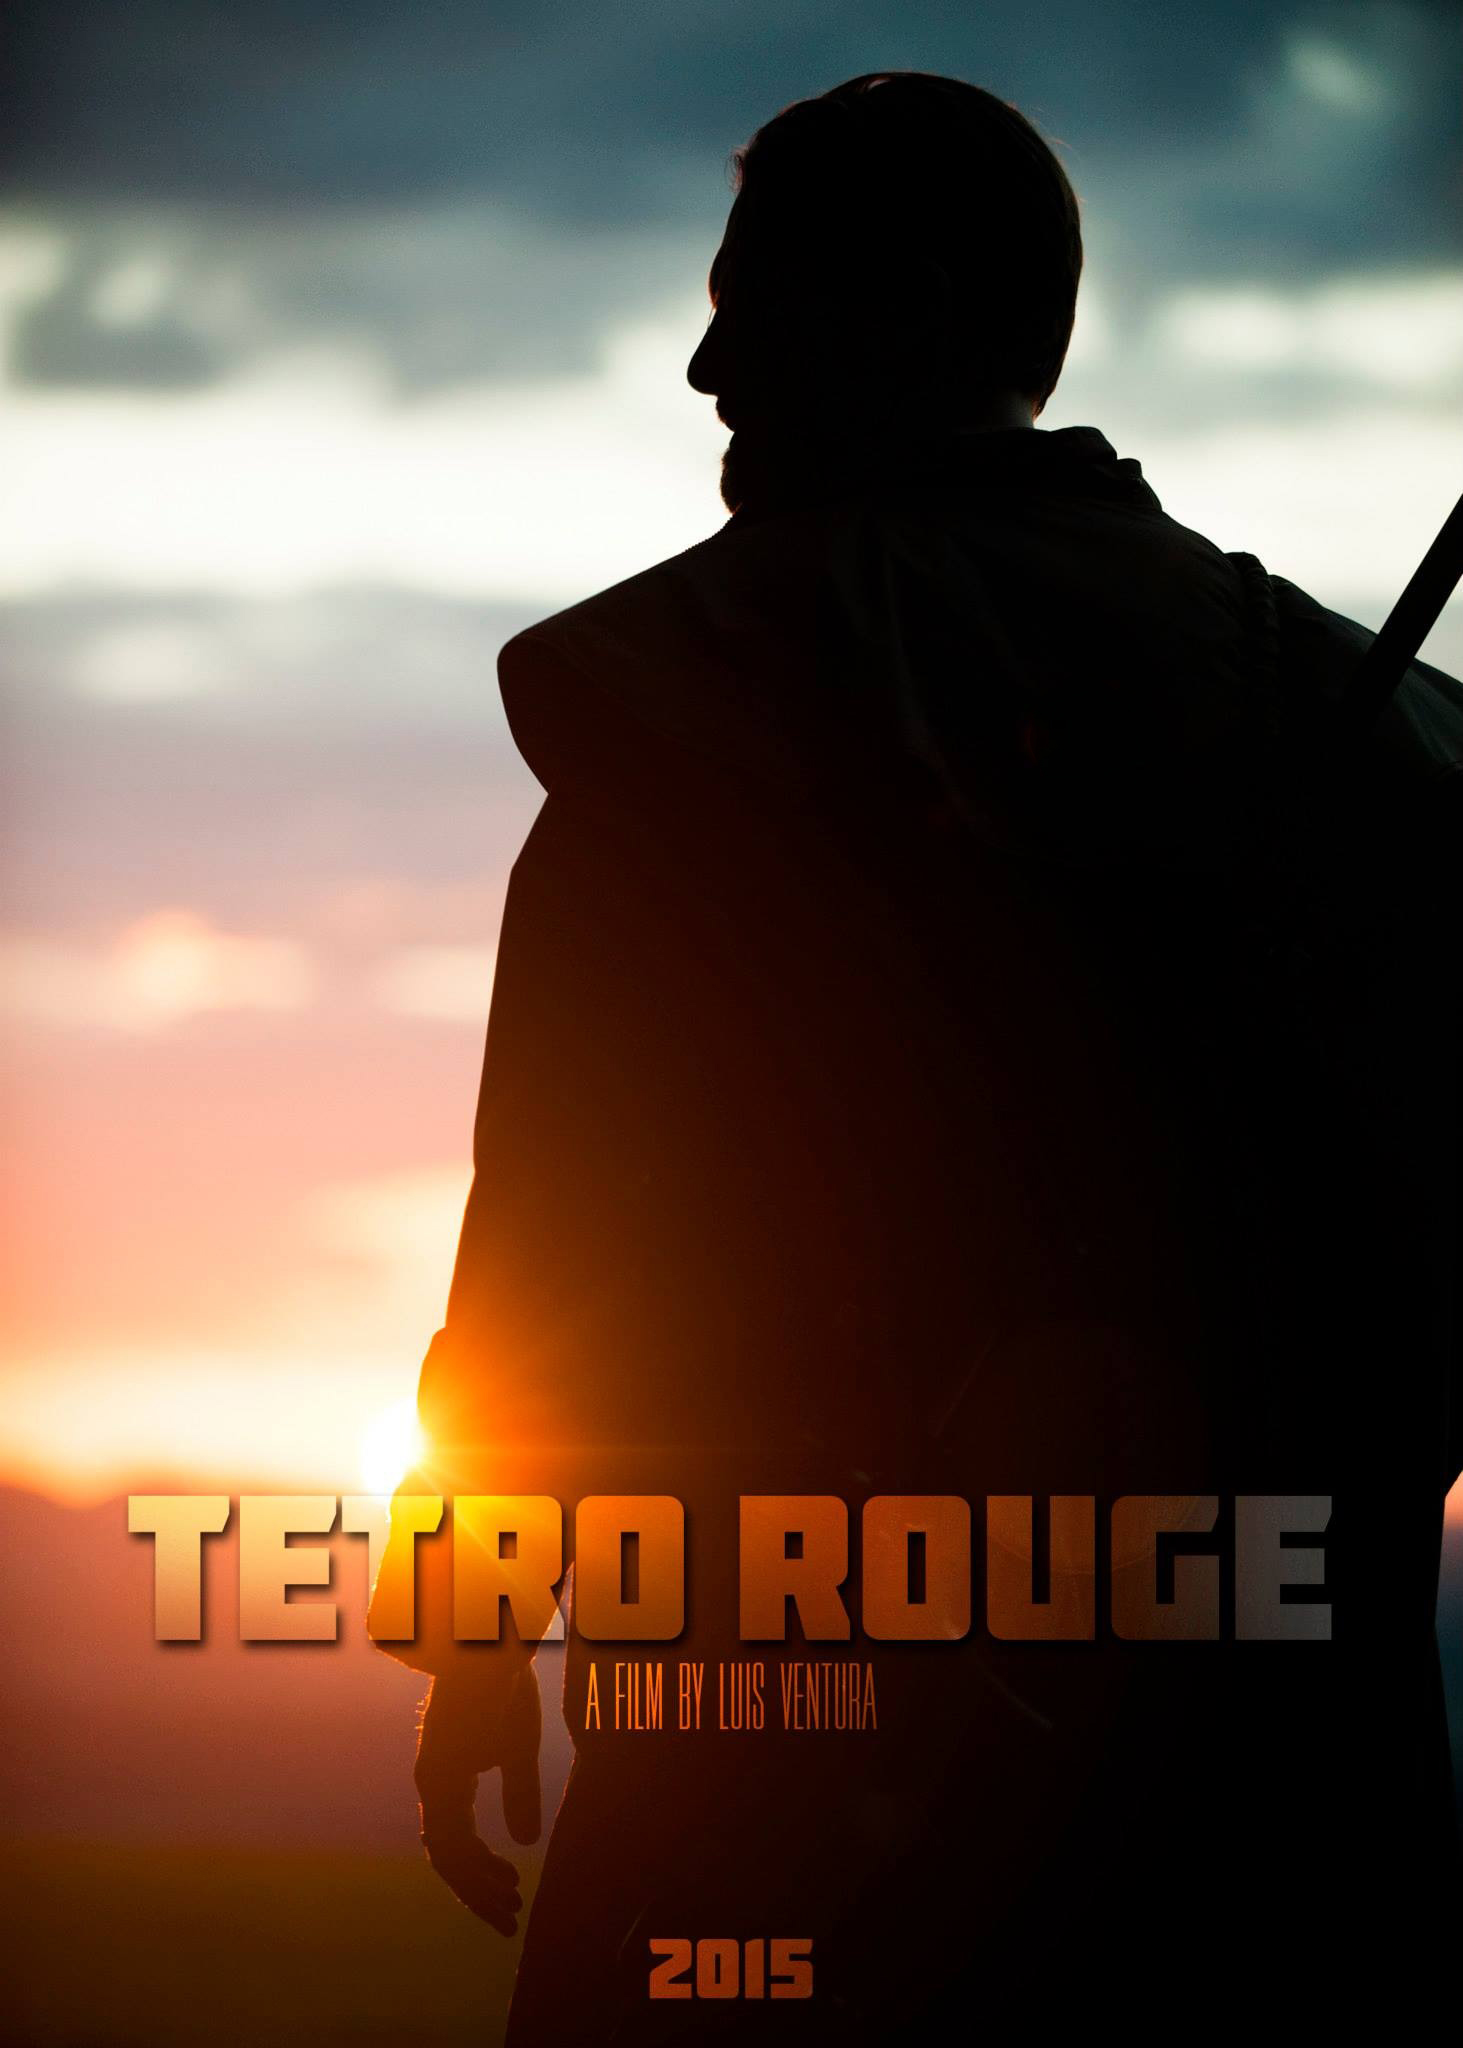 Art work for upcoming Action adventure 'Tetro Rouge'